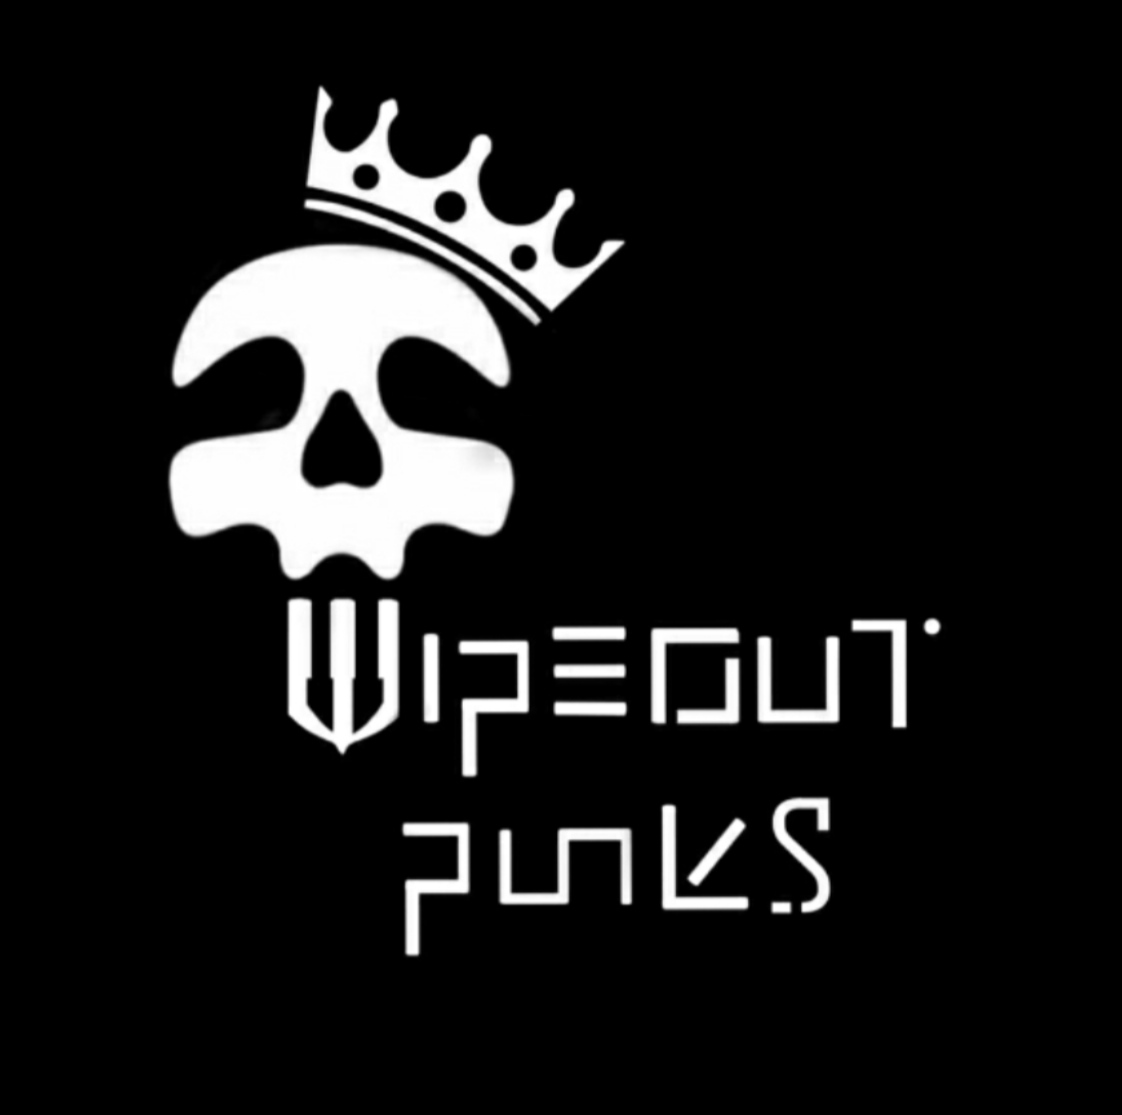 Wipe Out Punks